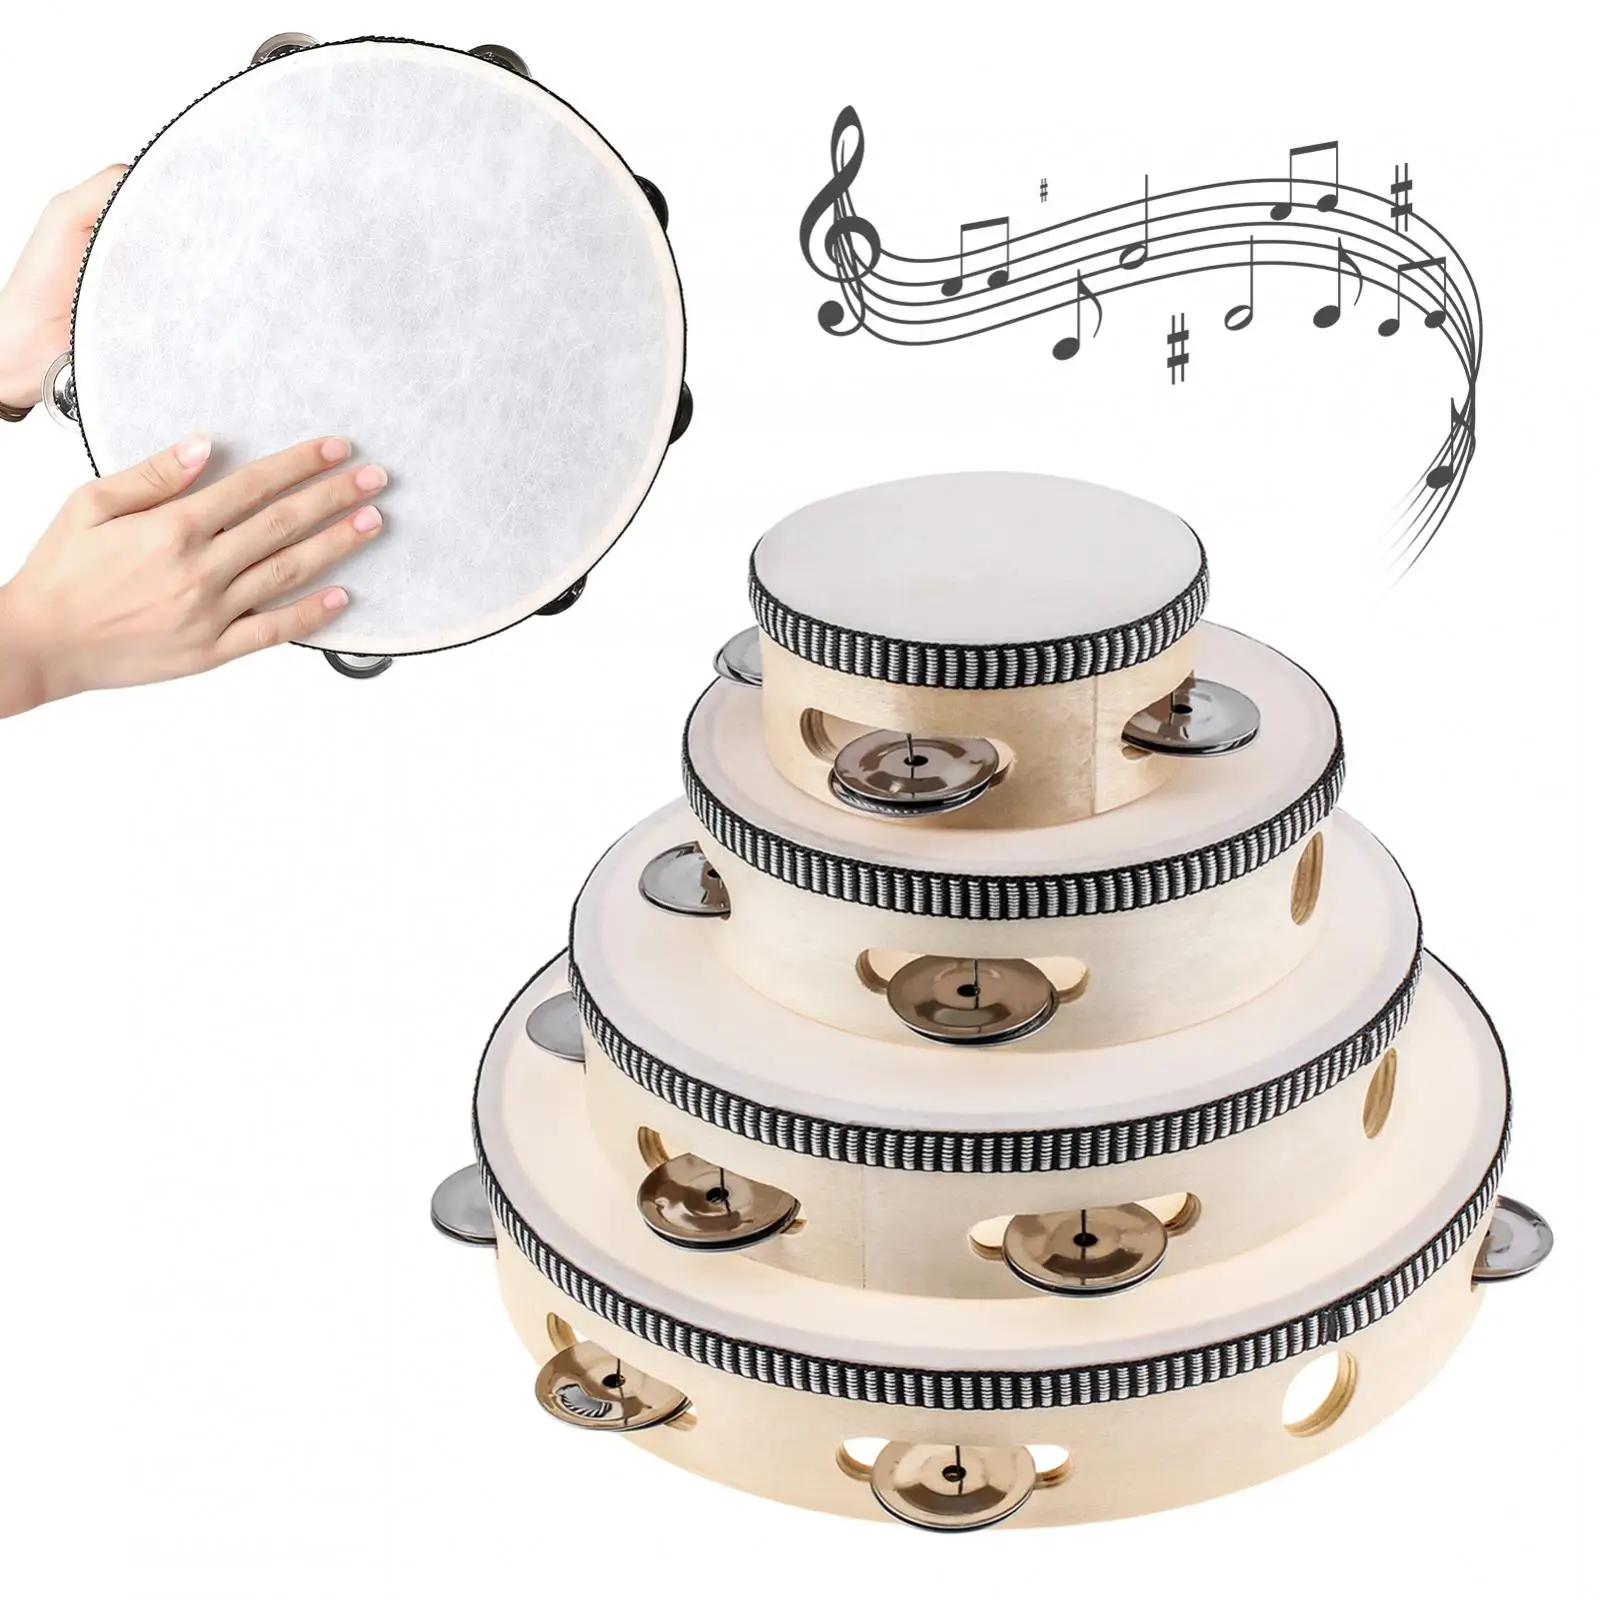 

4pcs/lot 4 / 6 / 8 / 10 inch Mixed Hand Held Single Row Metal Jingles Wood Tambourine Musical Percussion Instrument